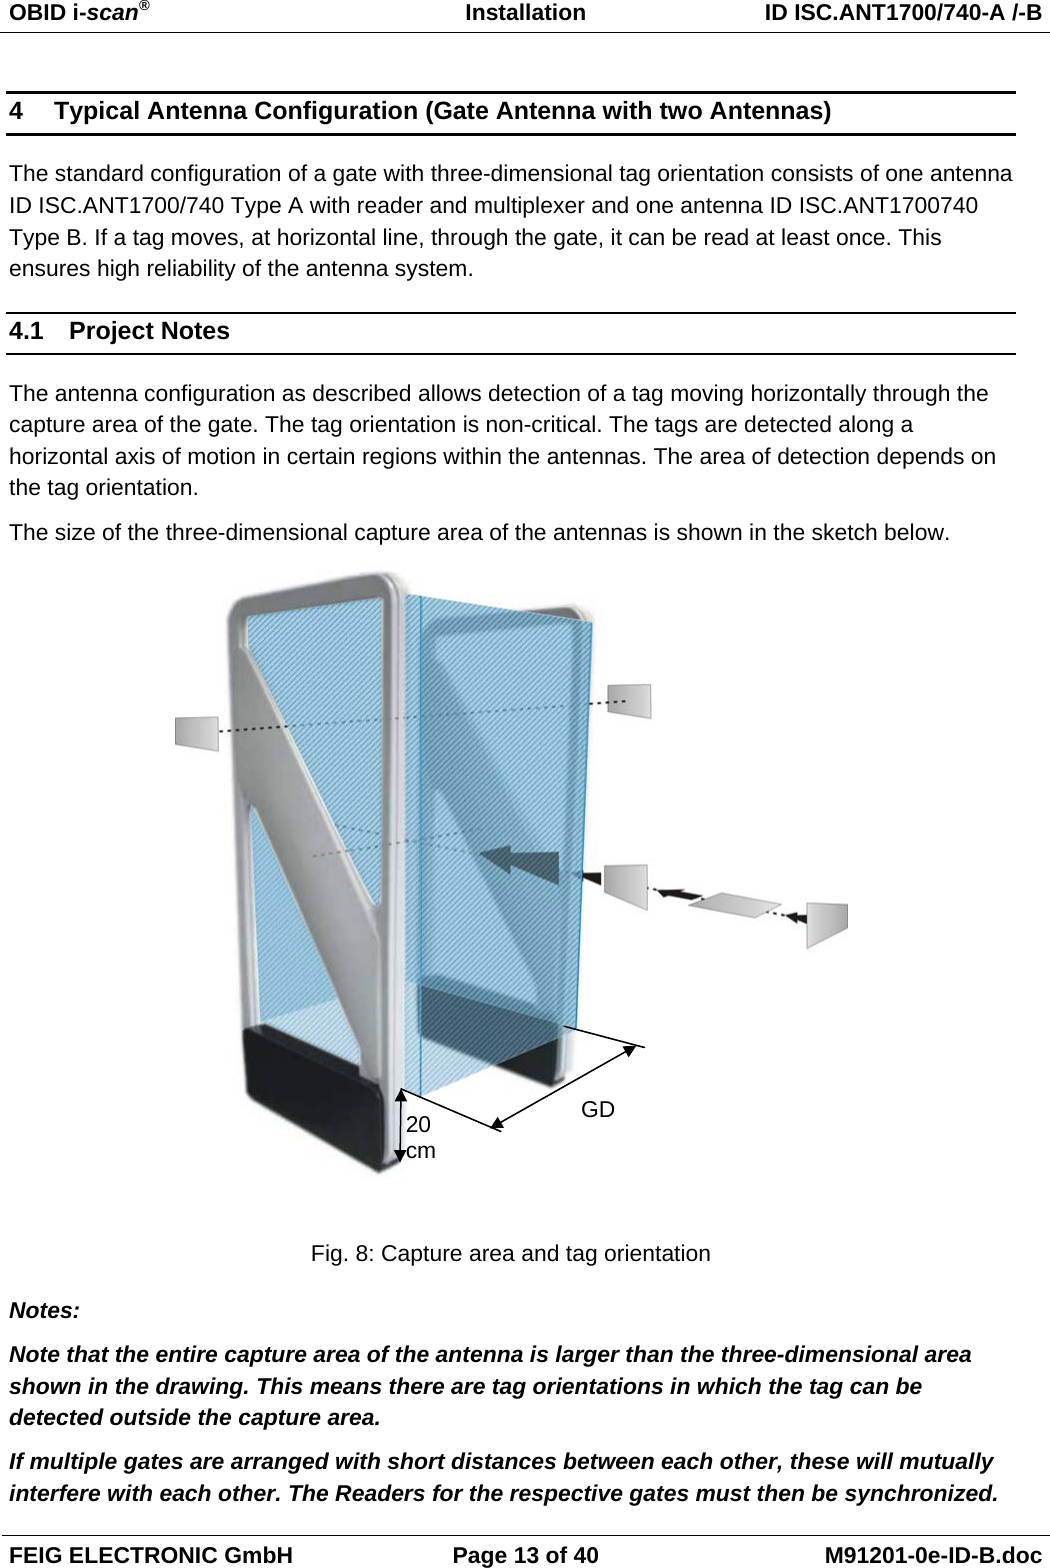 OBID i-scan®   Installation  ID ISC.ANT1700/740-A /-B FEIG ELECTRONIC GmbH  Page 13 of 40  M91201-0e-ID-B.doc 4  Typical Antenna Configuration (Gate Antenna with two Antennas) The standard configuration of a gate with three-dimensional tag orientation consists of one antenna ID ISC.ANT1700/740 Type A with reader and multiplexer and one antenna ID ISC.ANT1700740 Type B. If a tag moves, at horizontal line, through the gate, it can be read at least once. This ensures high reliability of the antenna system. 4.1 Project Notes The antenna configuration as described allows detection of a tag moving horizontally through the capture area of the gate. The tag orientation is non-critical. The tags are detected along a horizontal axis of motion in certain regions within the antennas. The area of detection depends on the tag orientation. The size of the three-dimensional capture area of the antennas is shown in the sketch below.   Fig. 8: Capture area and tag orientation Notes: Note that the entire capture area of the antenna is larger than the three-dimensional area shown in the drawing. This means there are tag orientations in which the tag can be detected outside the capture area. If multiple gates are arranged with short distances between each other, these will mutually interfere with each other. The Readers for the respective gates must then be synchronized. GD 20 cm